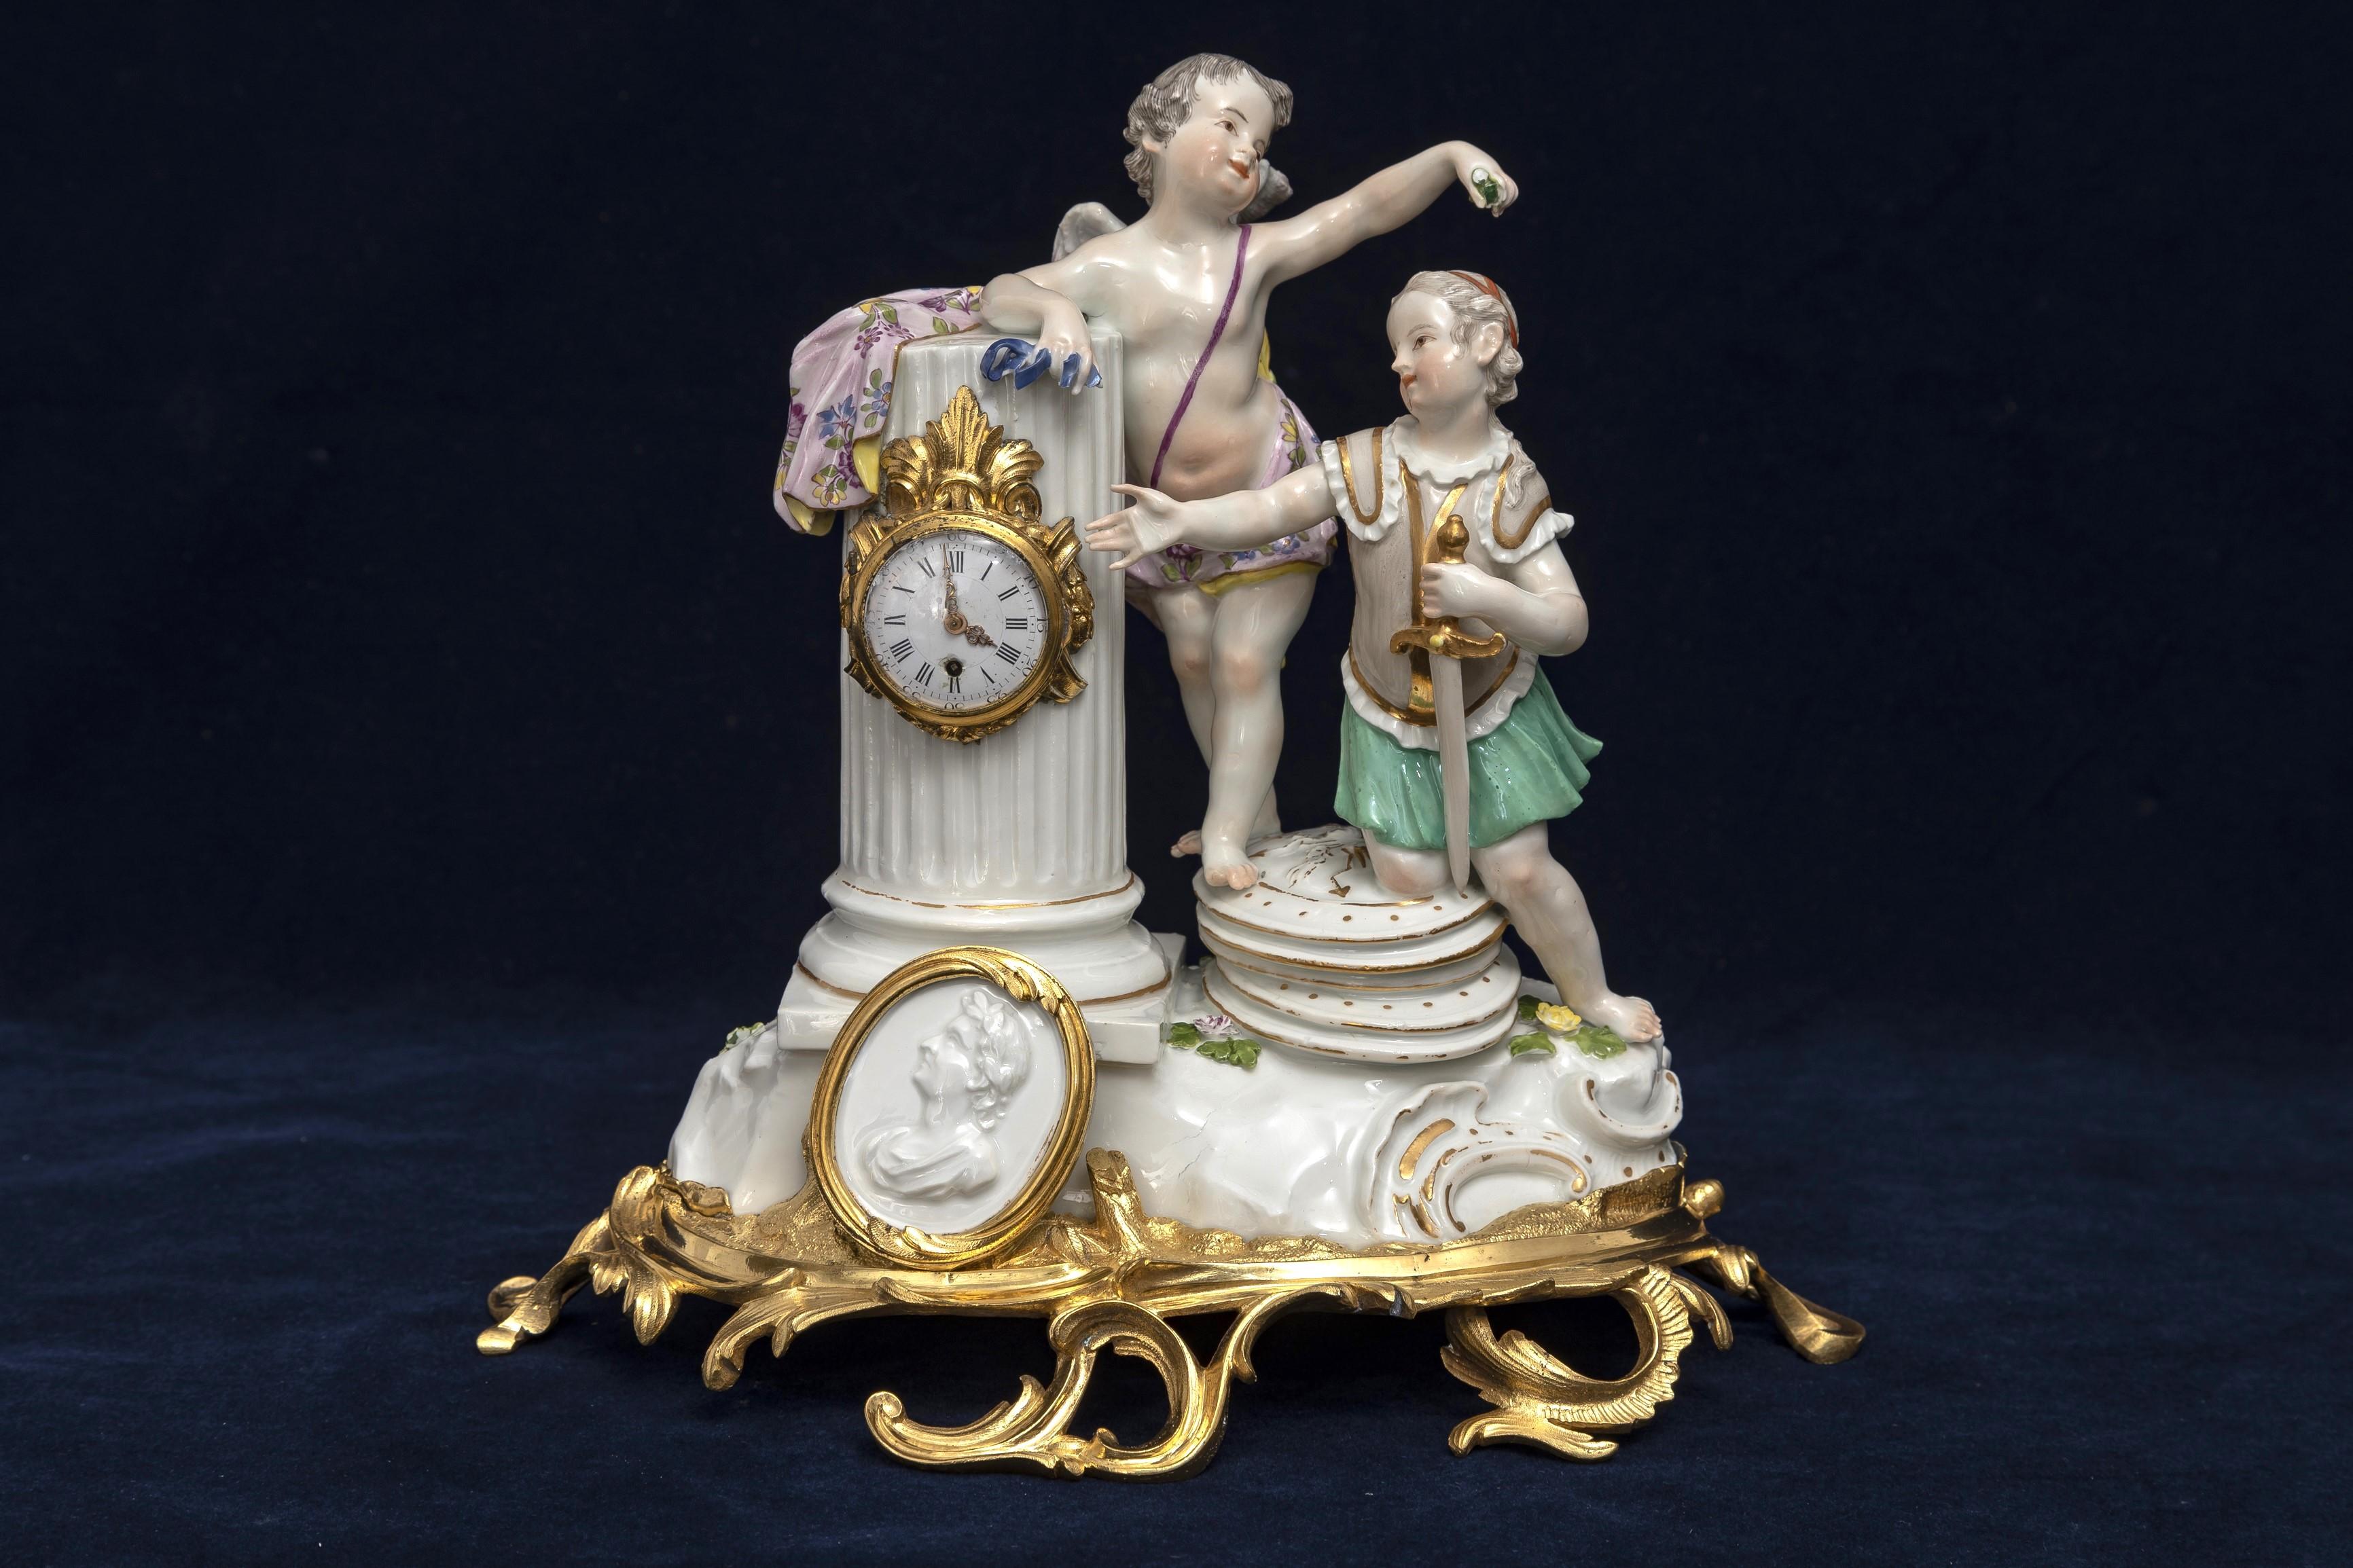 Louis XV An Important Rare 18th C. Ormolu Mounted Meissen Porcelain Putti Clock Grouping For Sale